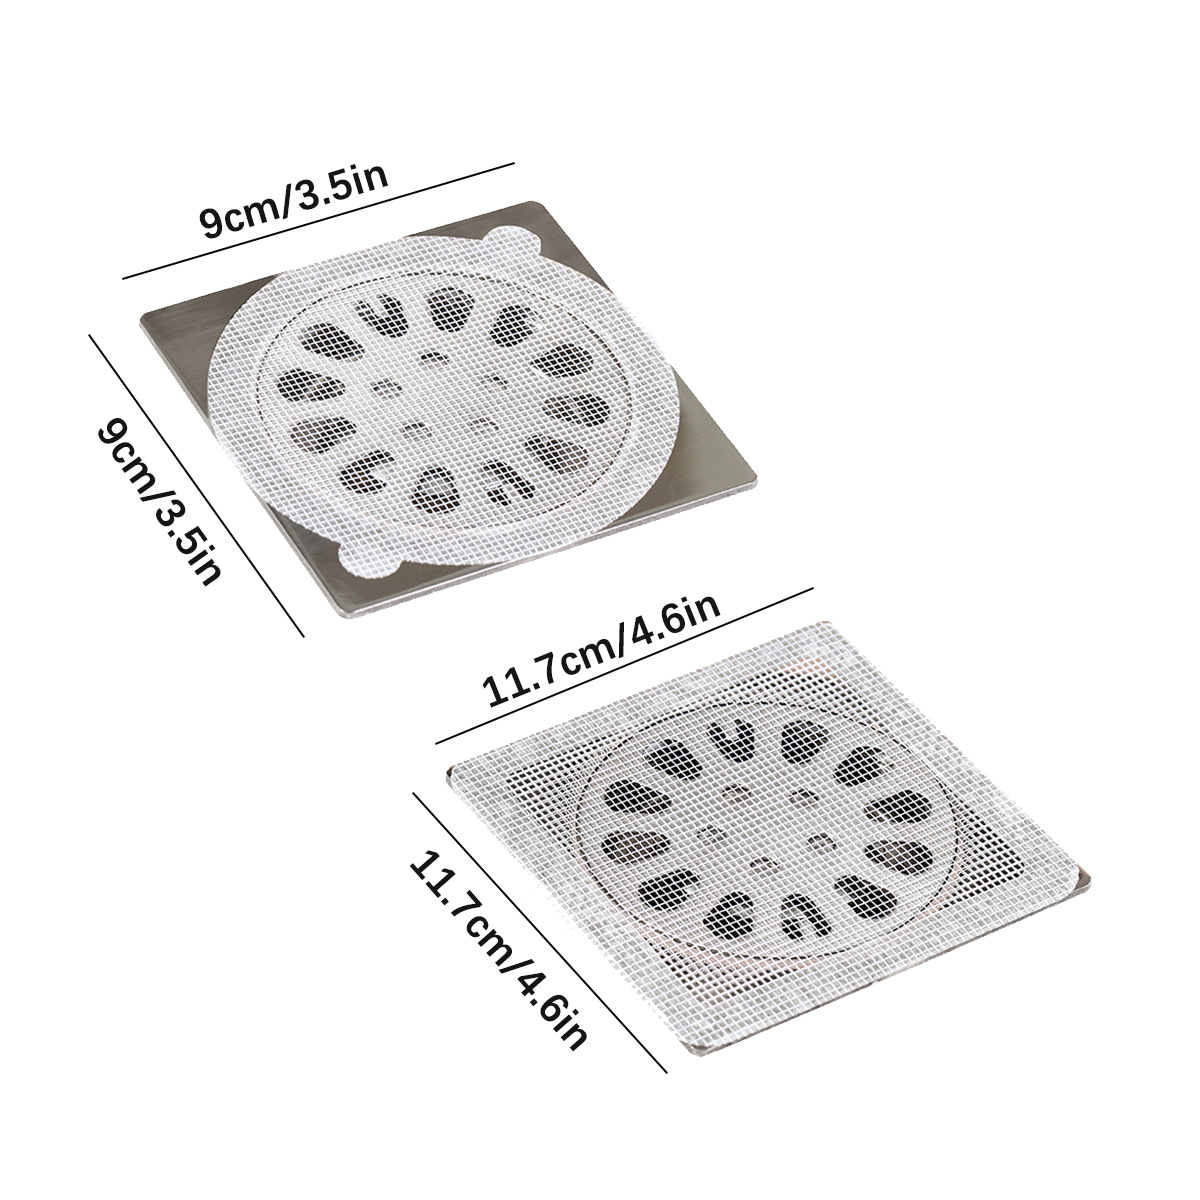 shower drain protector - Whisk